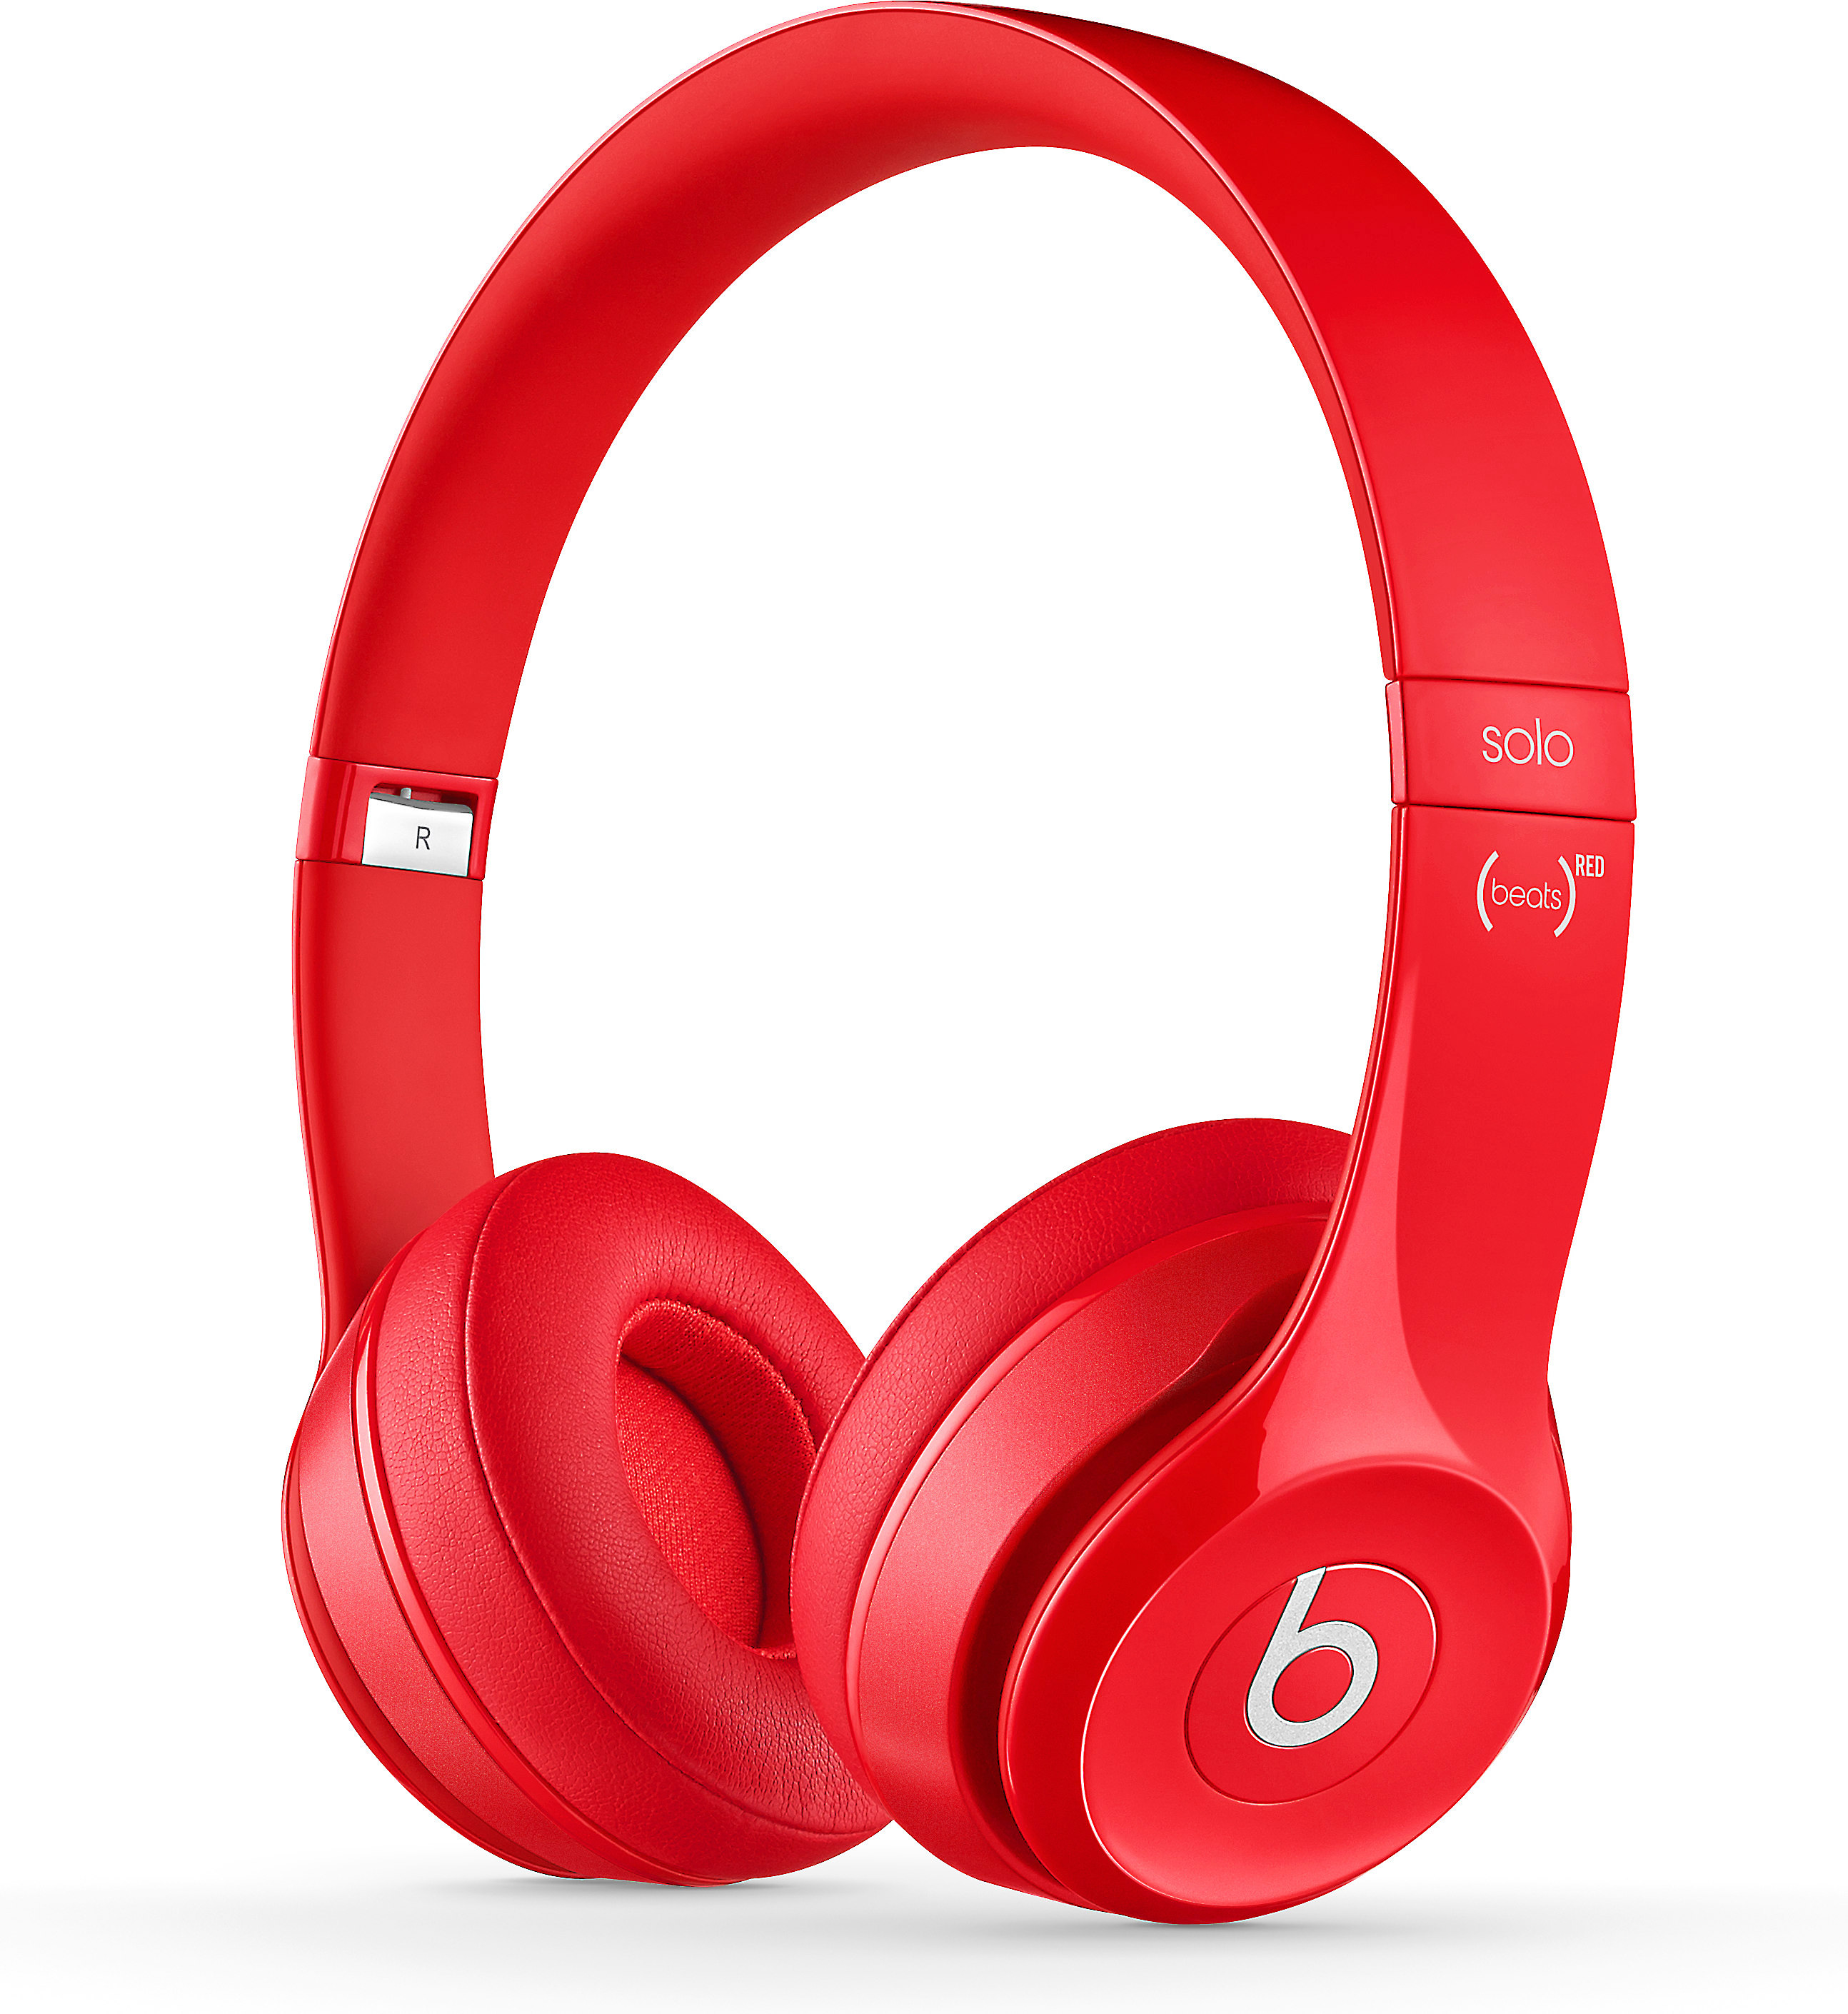 Beats By Dr Dre Solo2 Red On Ear Headphone With In Line Remote And Microphone At Crutchfield